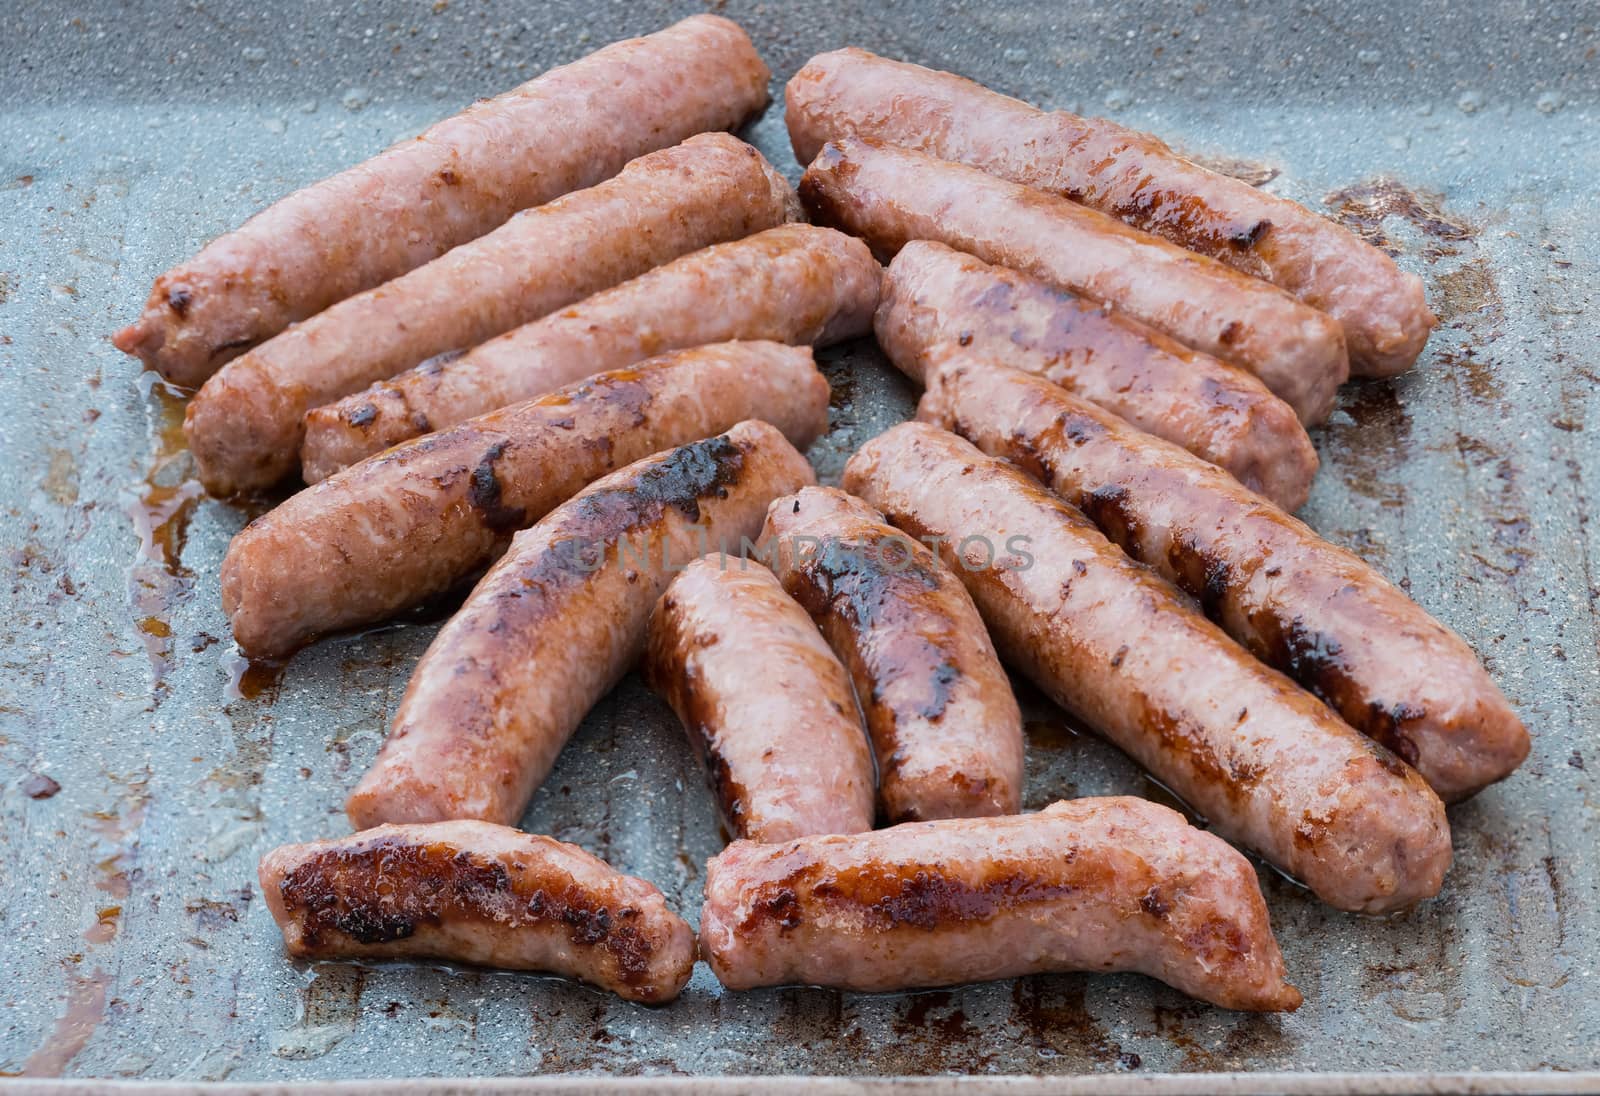 In the picture of the pork sausages are cooked on the grill ( barbecue) while.